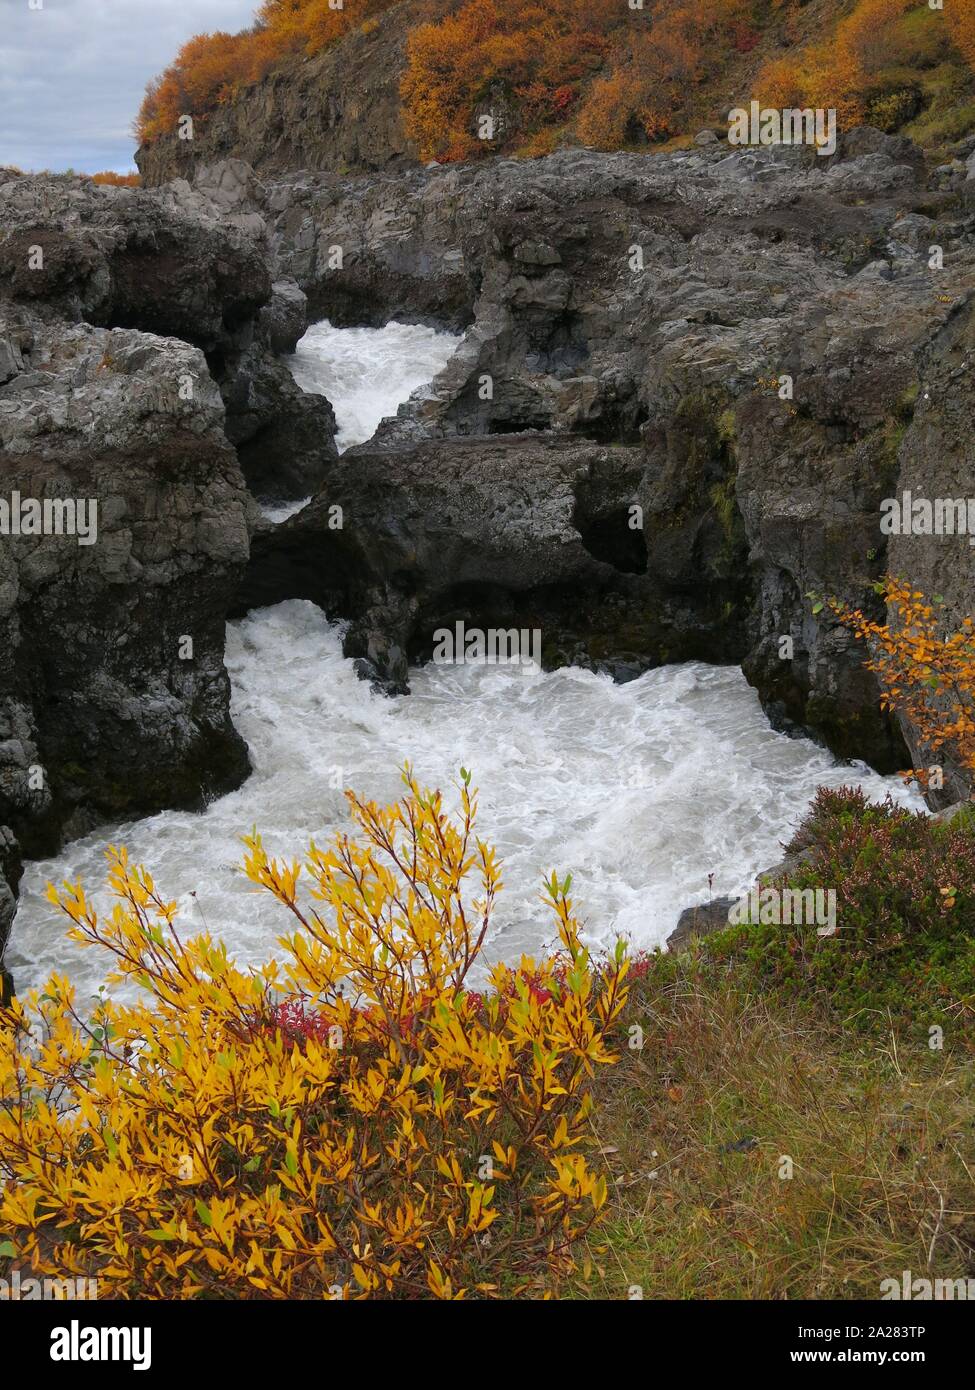 Autumn vegetation adds to the dramatic landscape at Barnafoss Waterfall, or the Children's Falls, as the rapids race down a narrow valley. Stock Photo